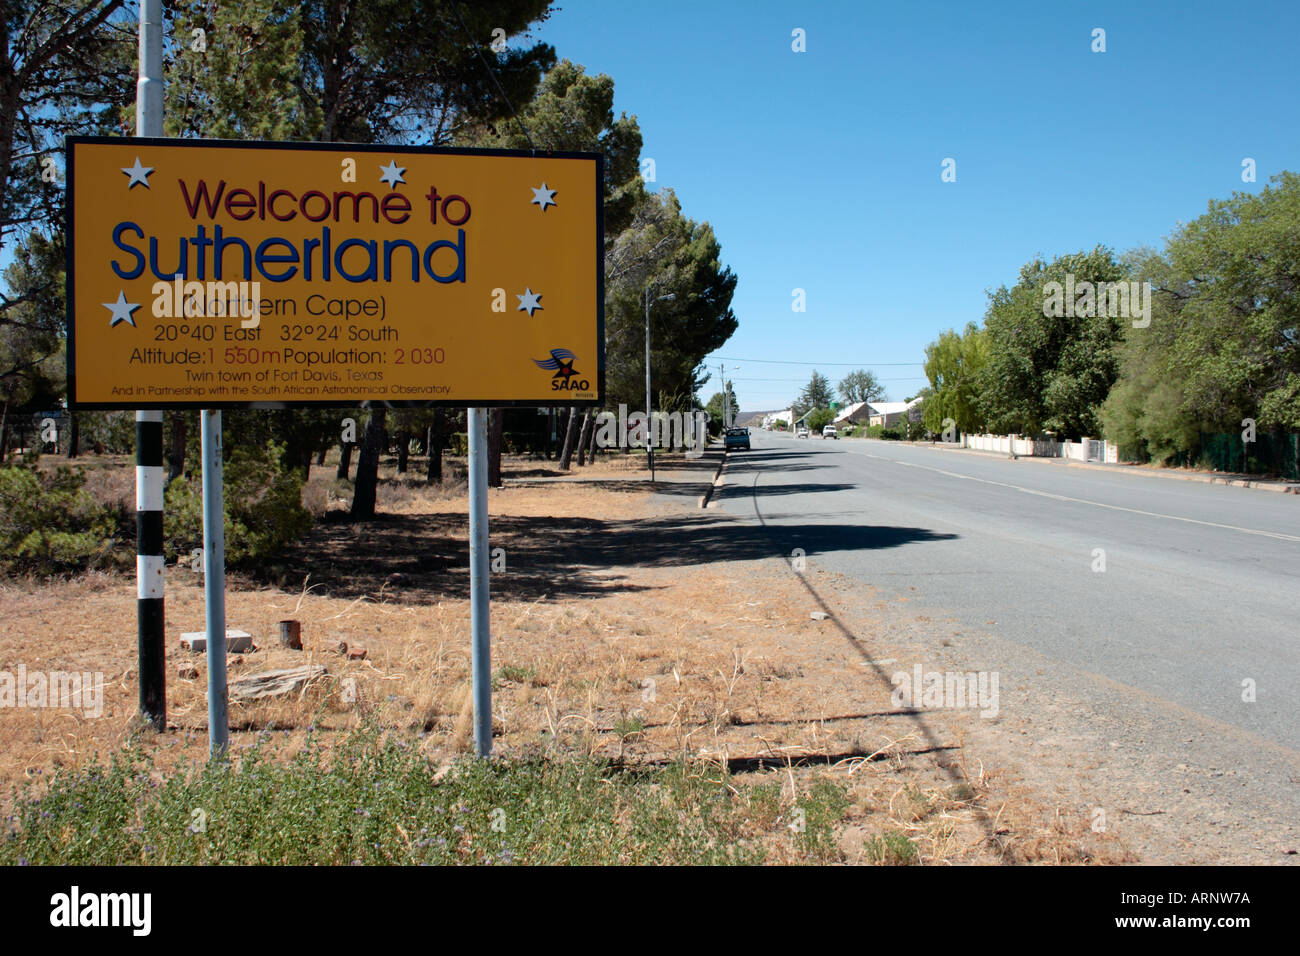 Welcome to Sutherland sign, Northern Cape South Africa Stock Photo